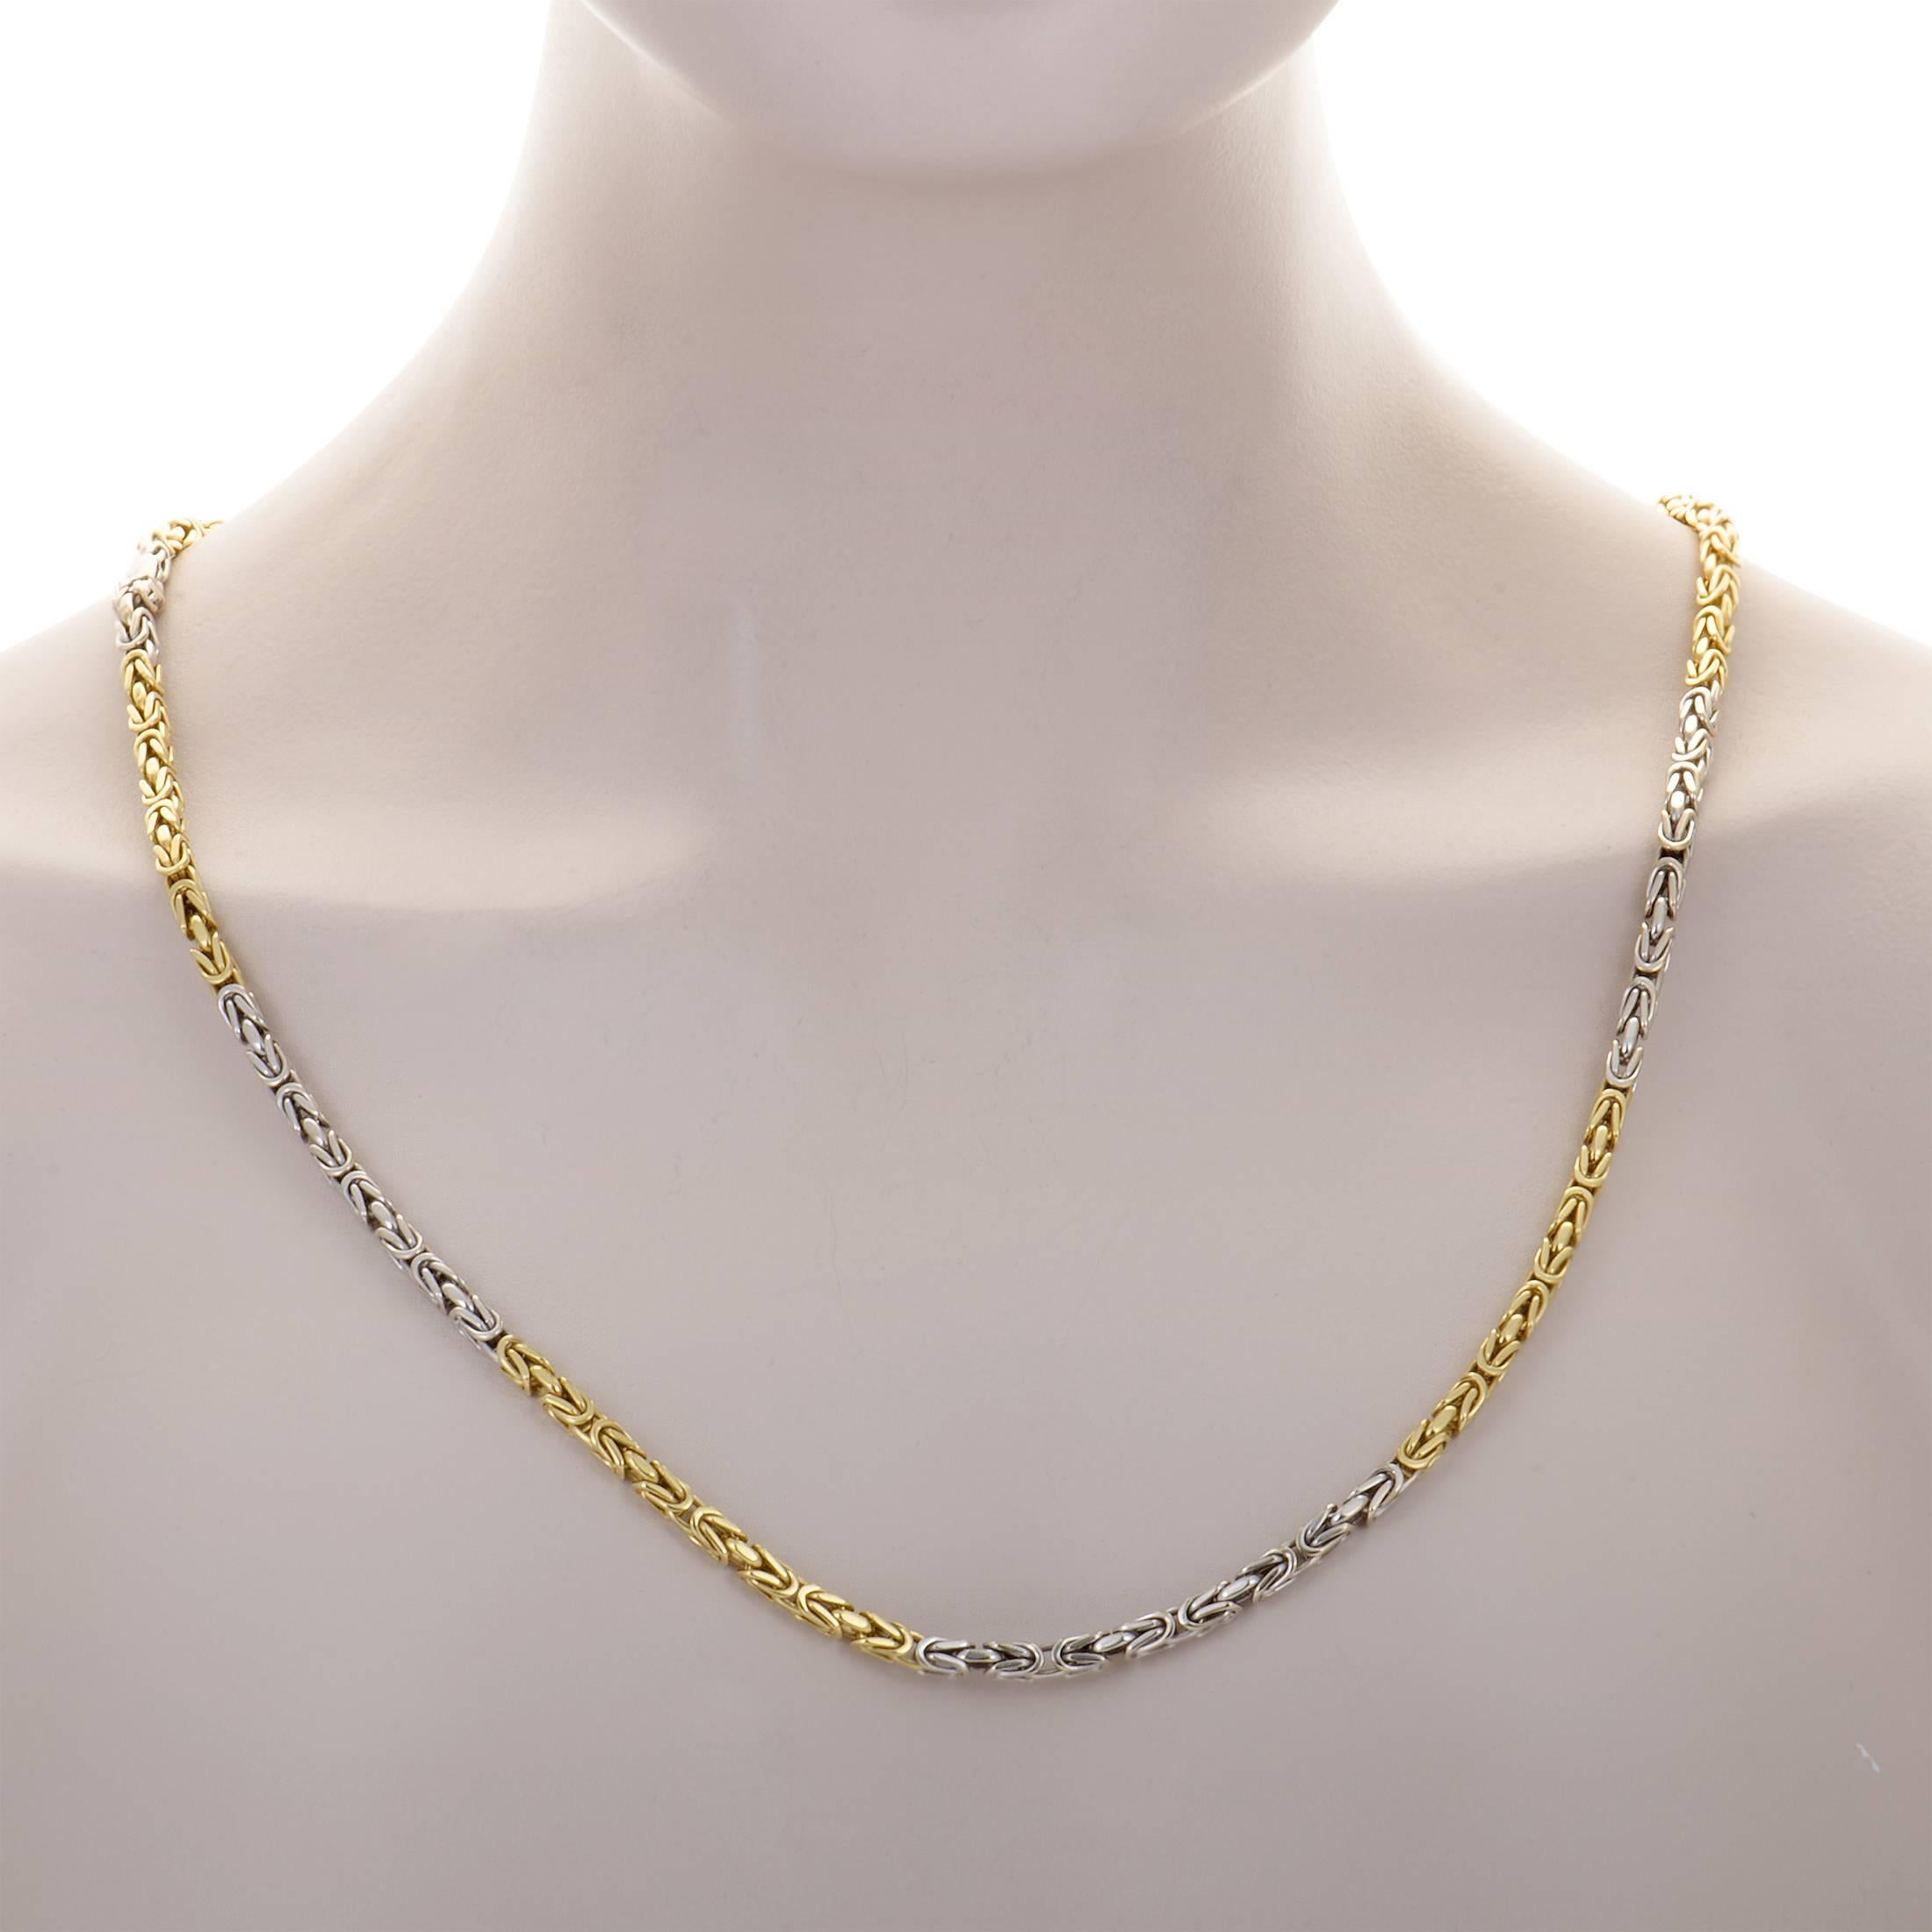 An intricate chain that produces a mesmerizing allure with its intriguing pattern is made of a luxurious combination of 18K yellow and white gold in this exceptional necklace from Bvlgari which offers an elegant and stylish appearance.